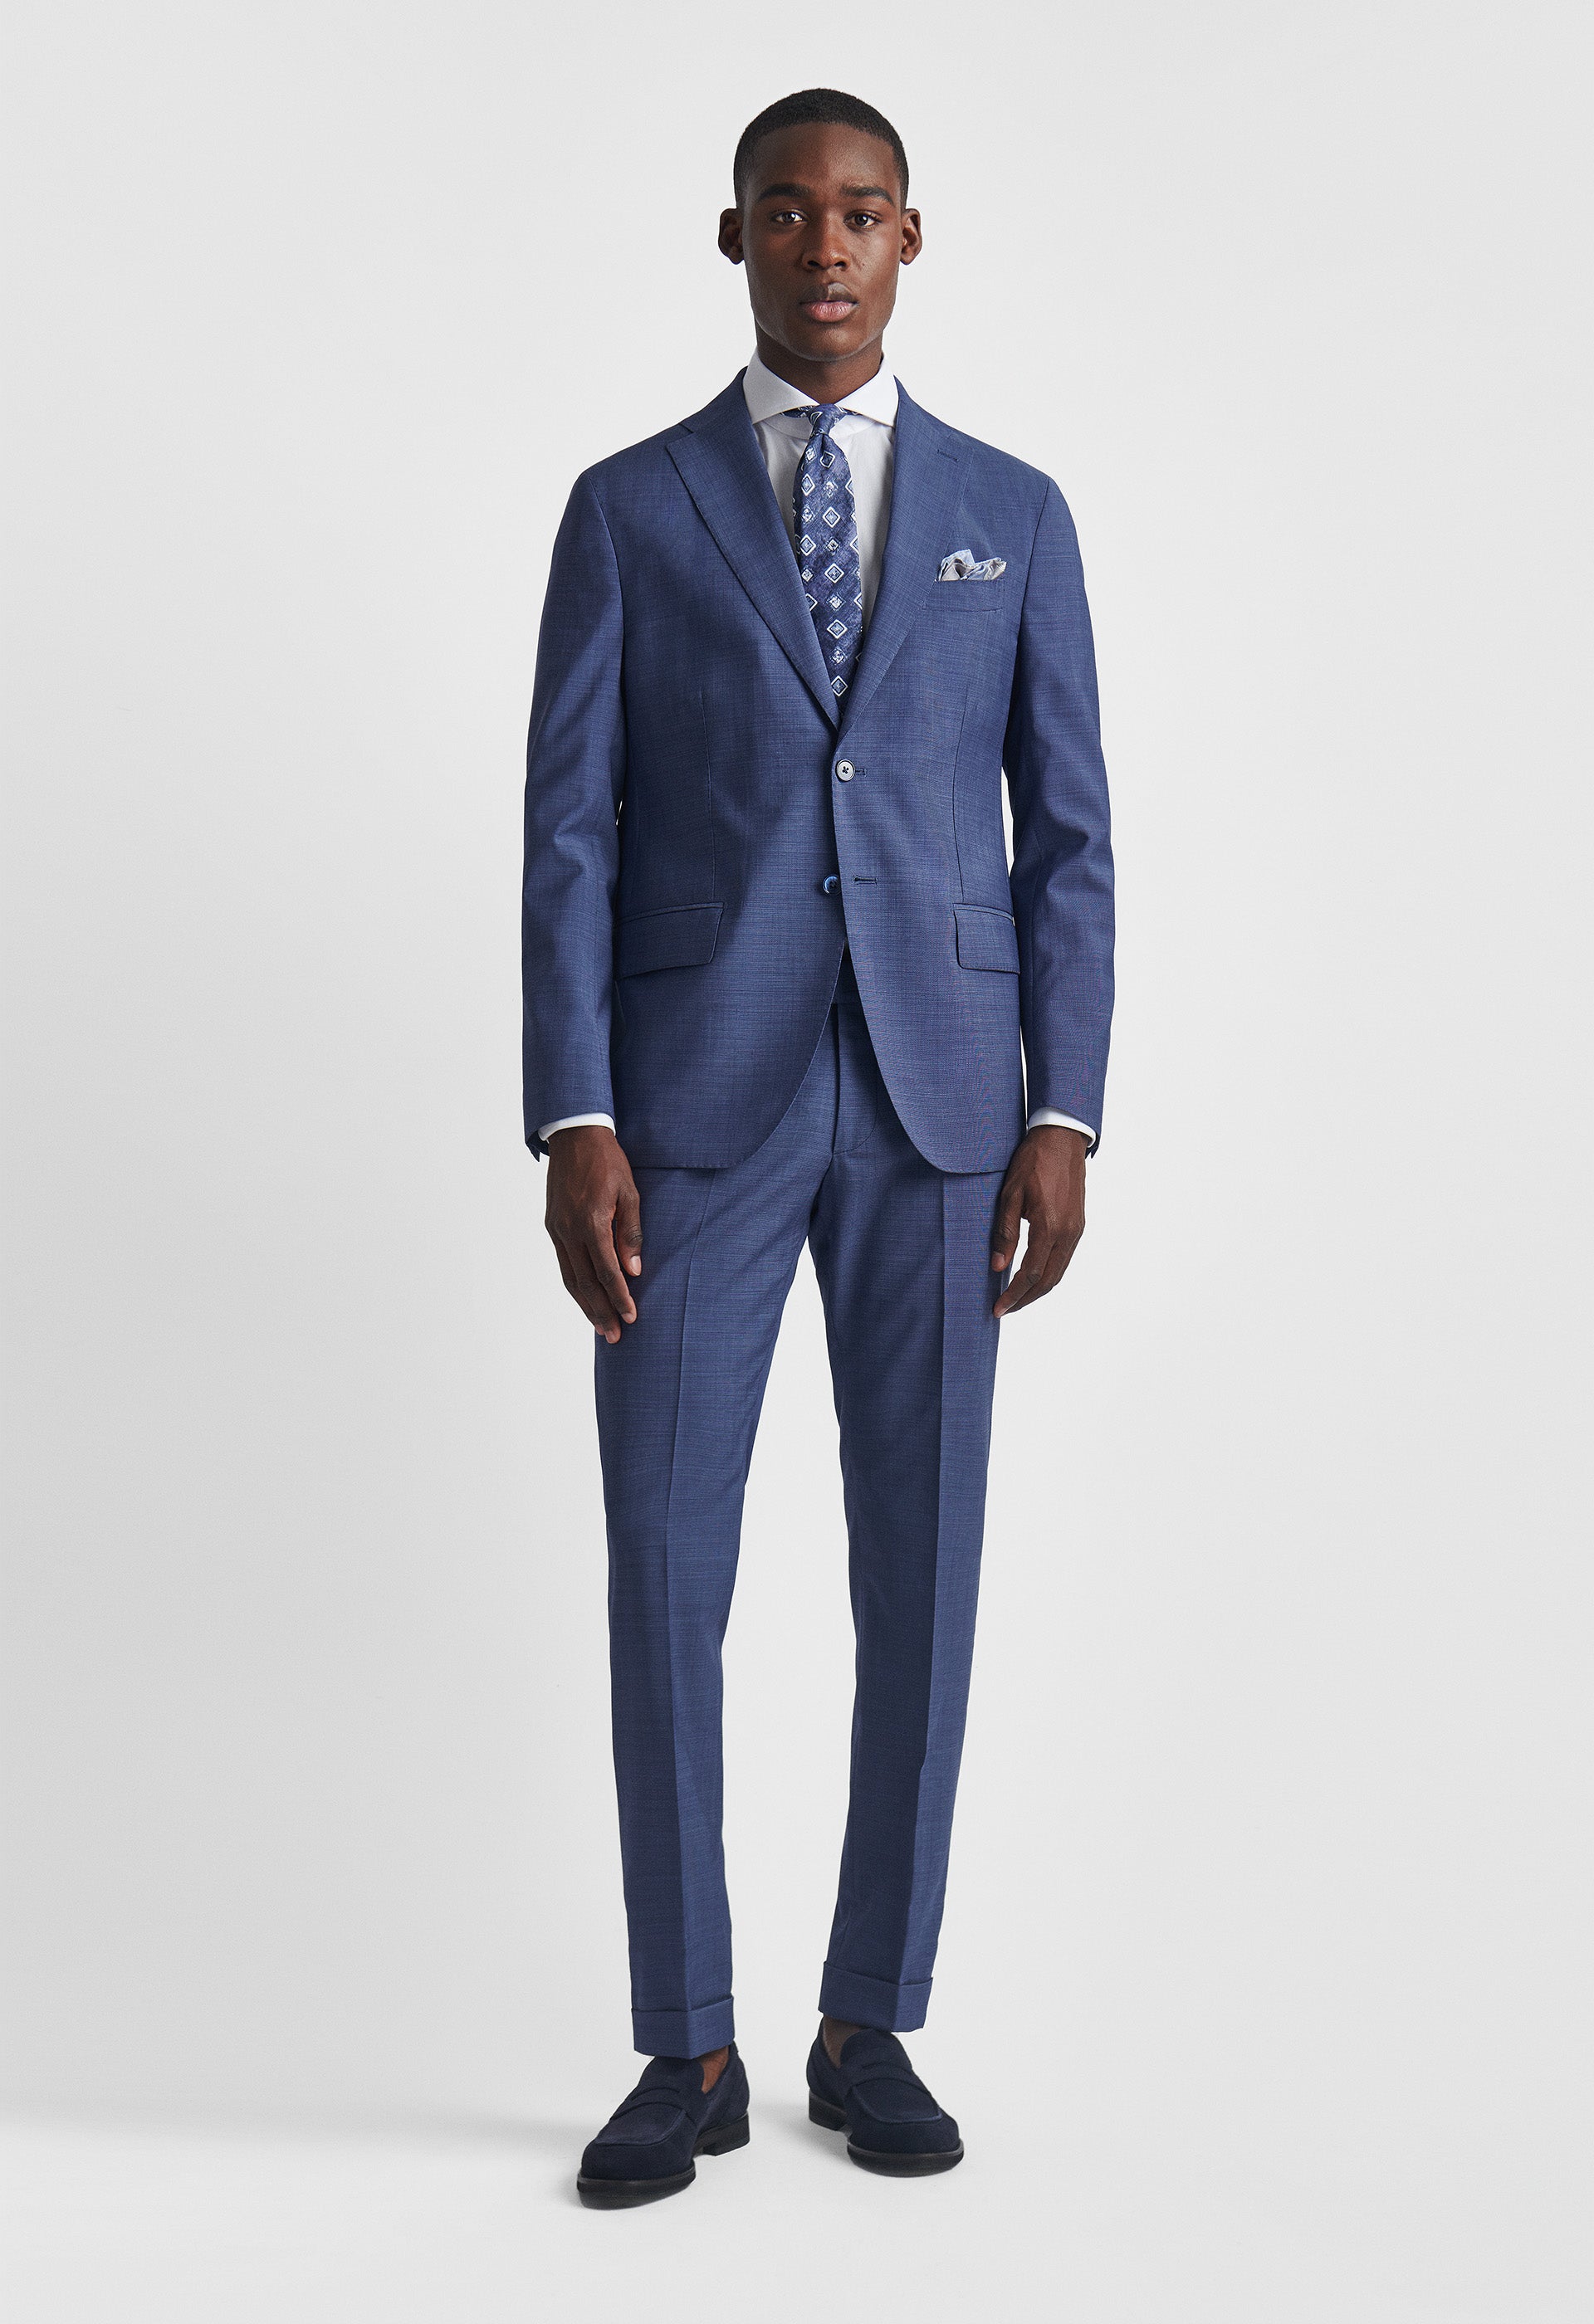 Avion Blue Wool Pure Suits - Tollegno Fabric